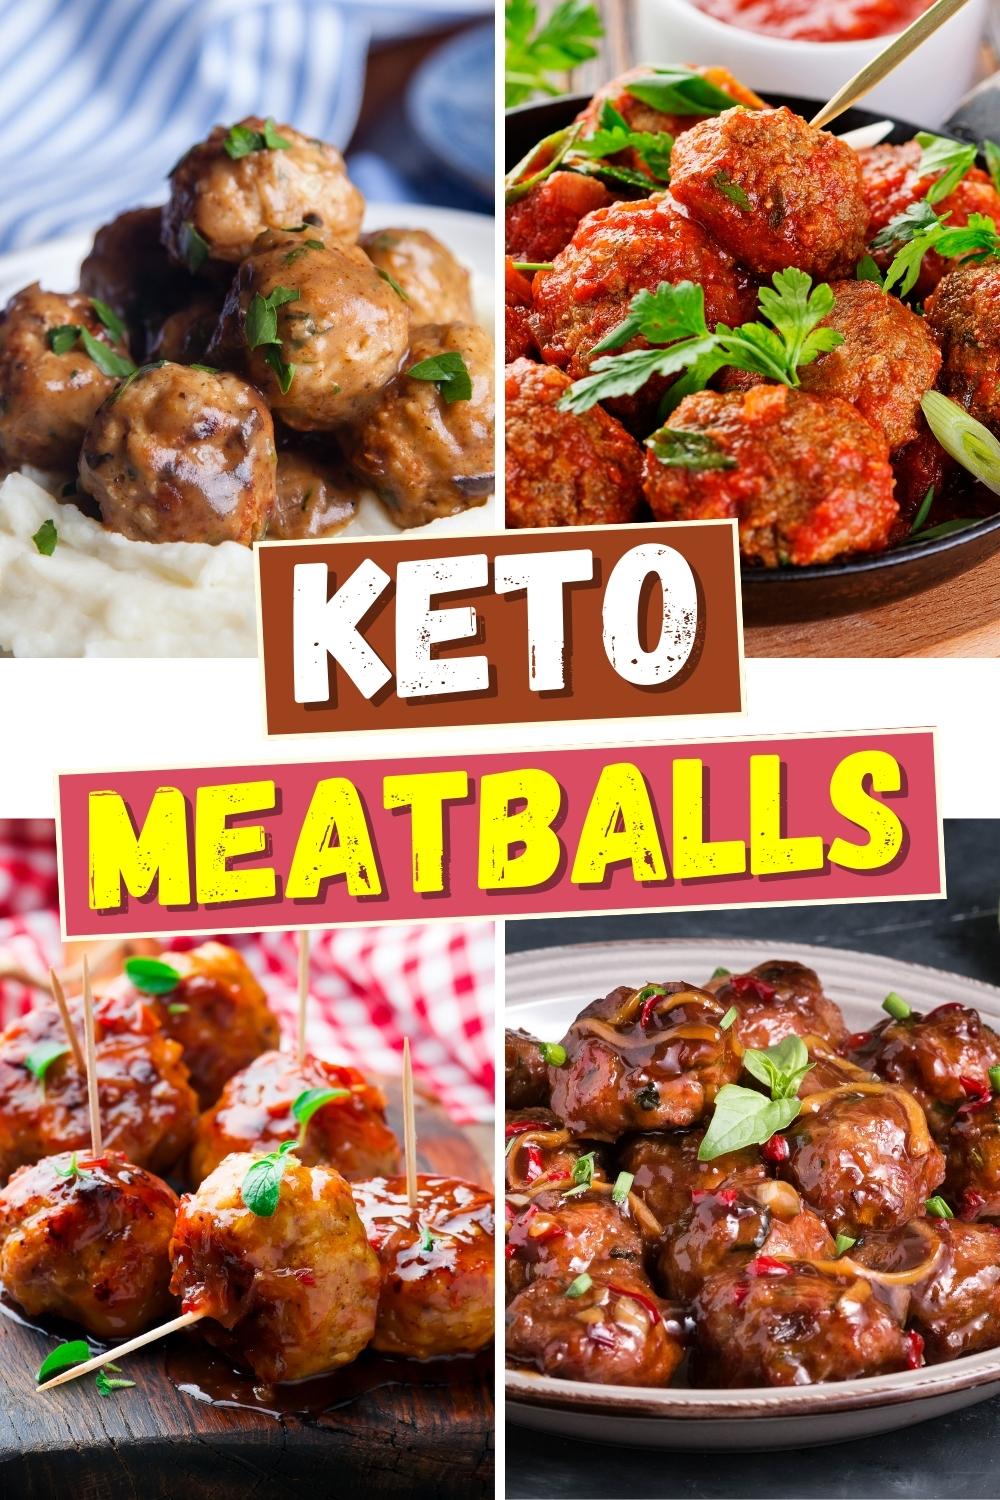 20 Best Keto Meatballs (+ Low-Carb Recipes) - Insanely Good